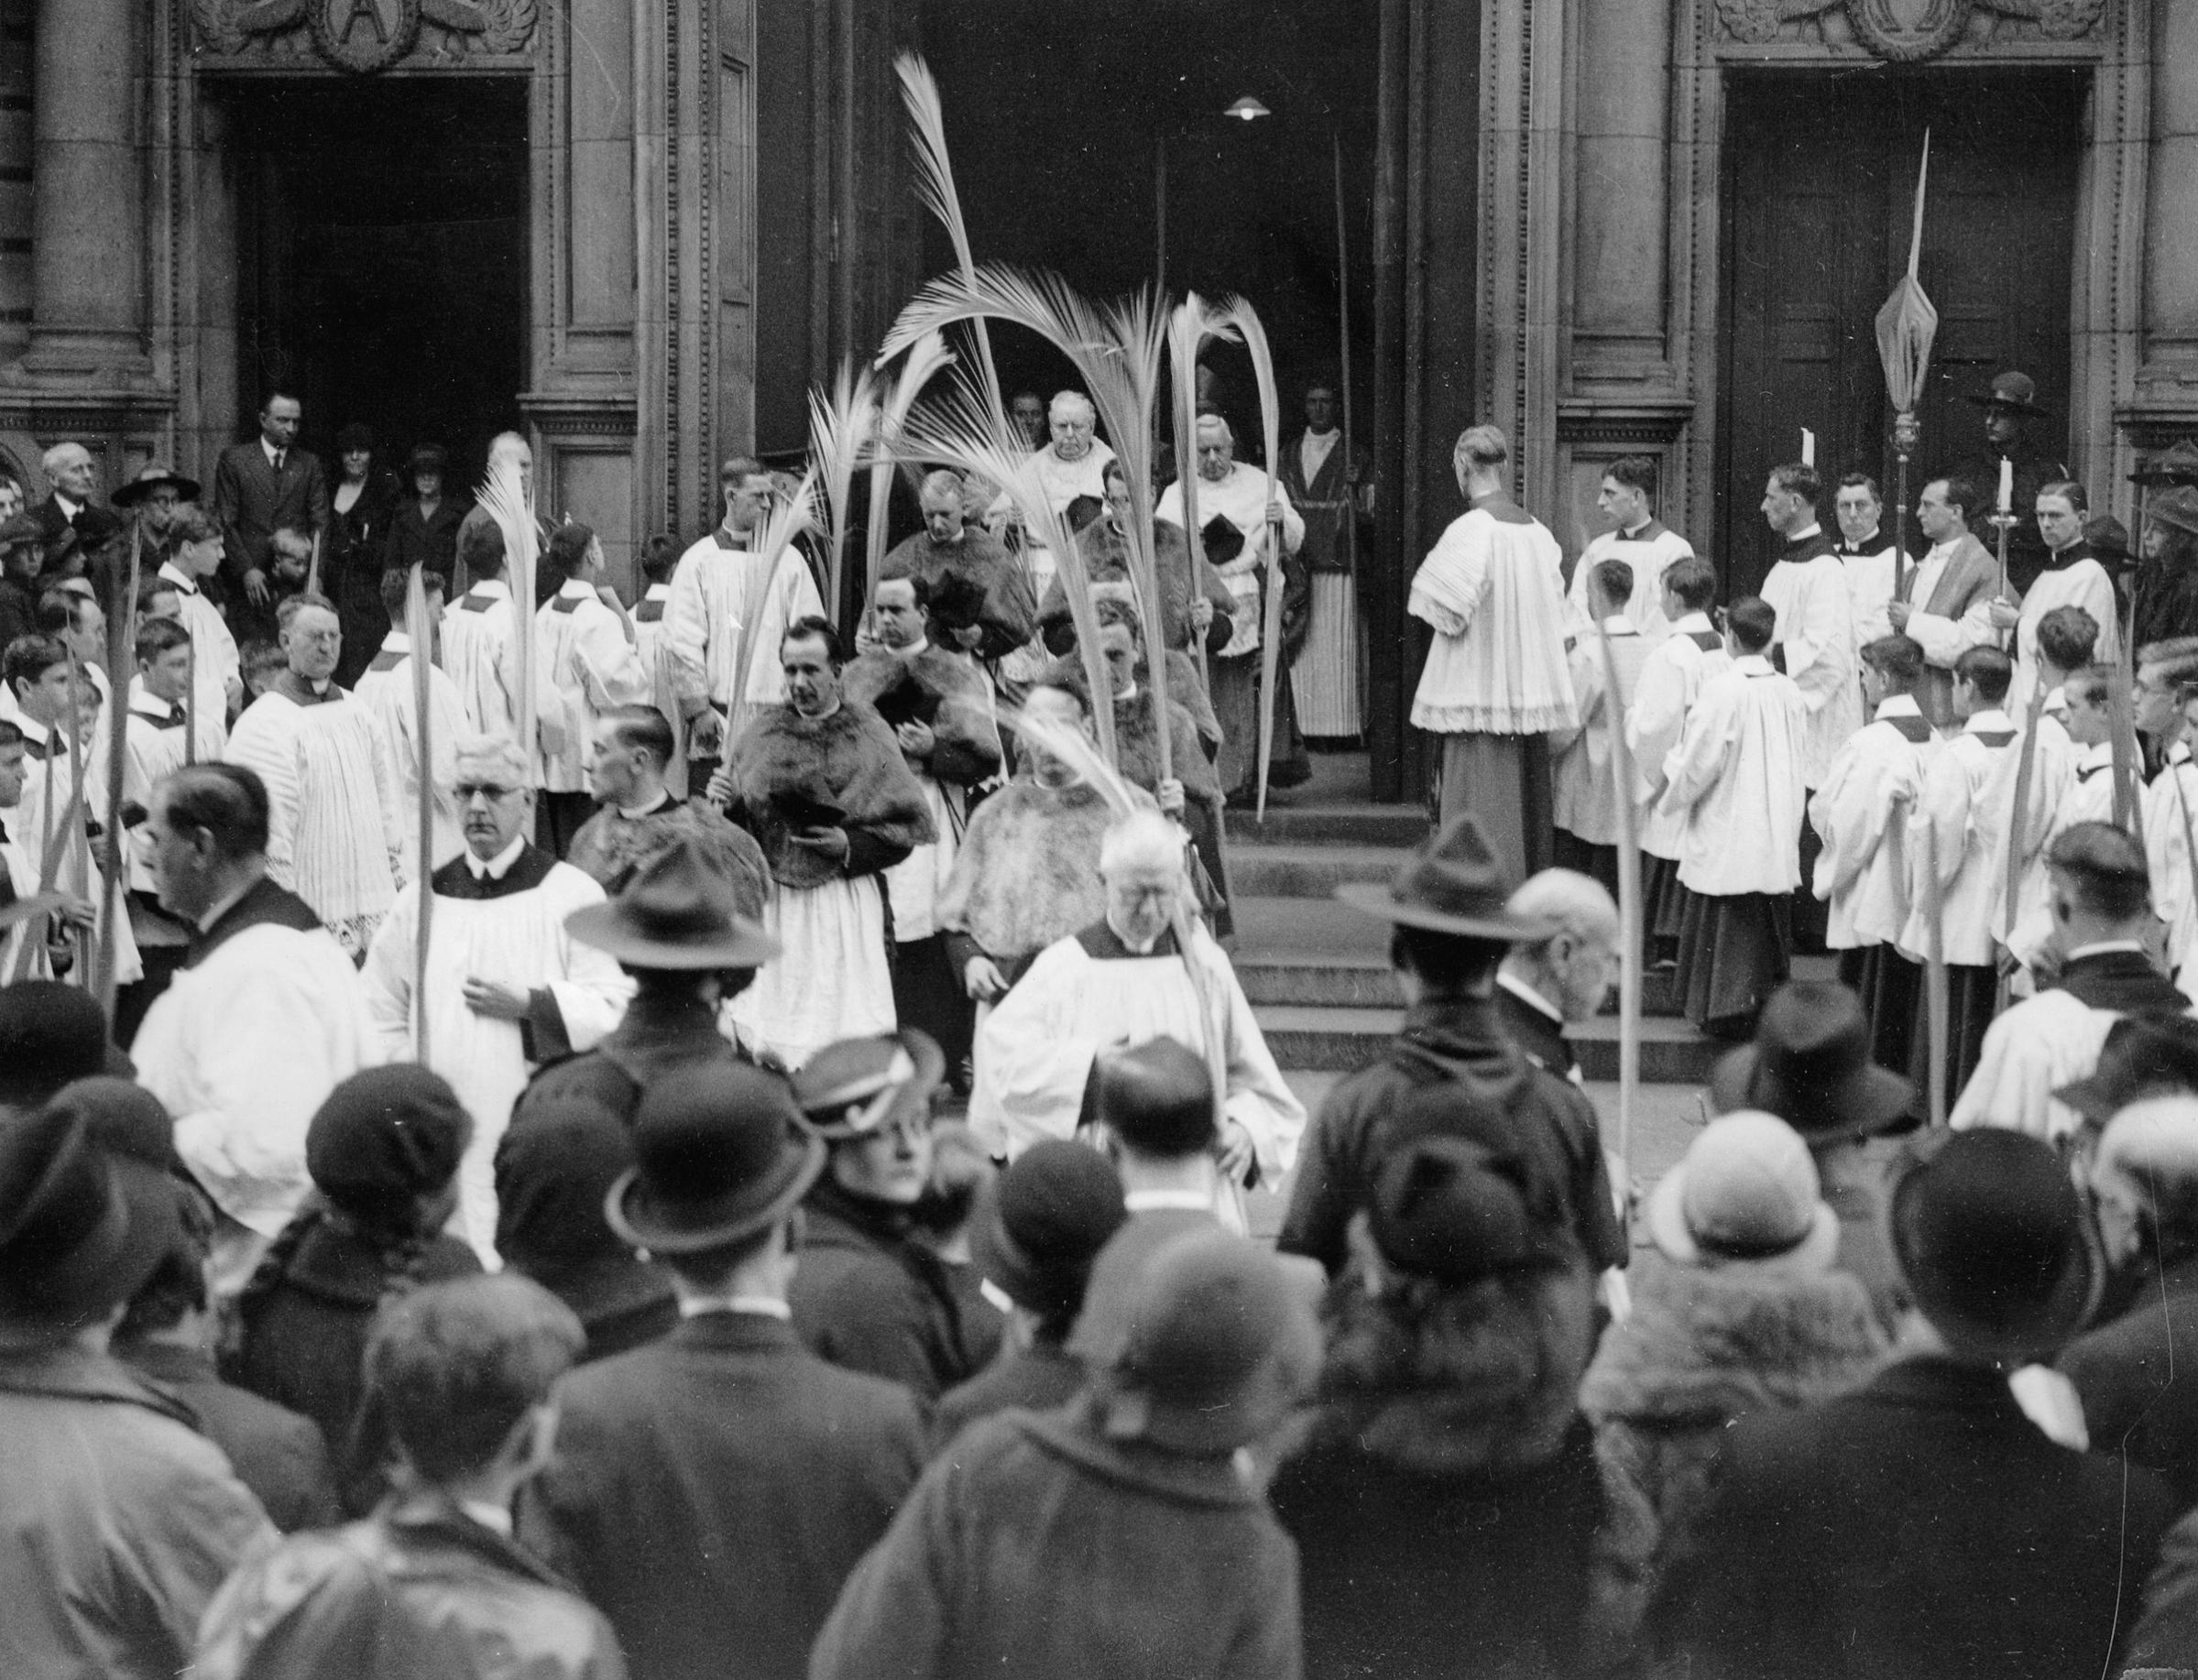 Easter: Procession on Palm Sunday in England. Photograph. Around 1930.